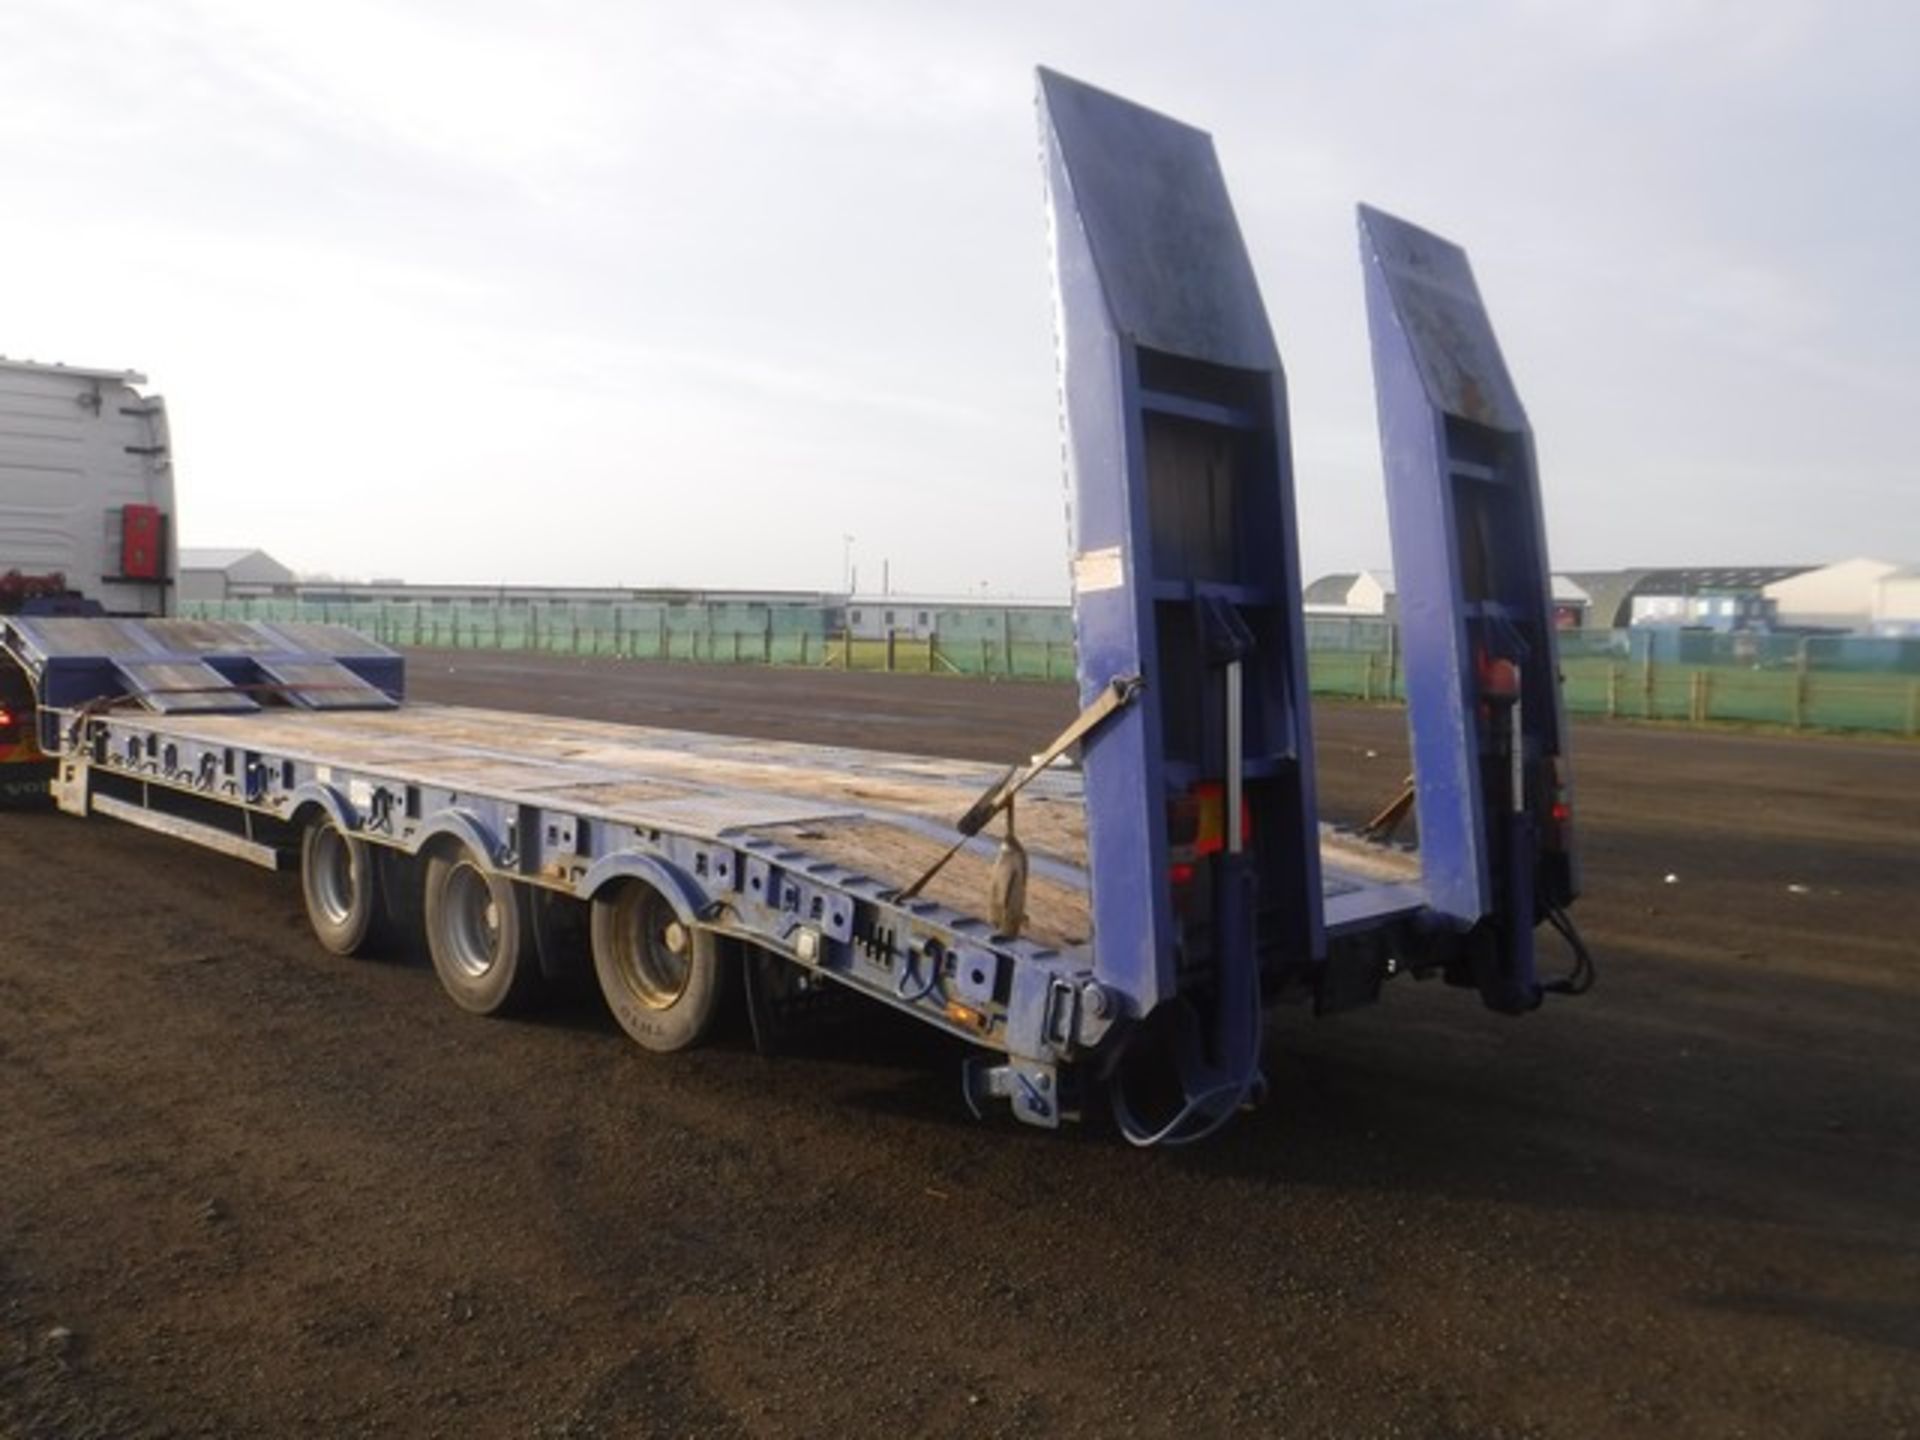 MACAULEY arctic low loader trailer c/w hydraulic ramps, winch & lifting equipment. 13.6m. - Image 3 of 6